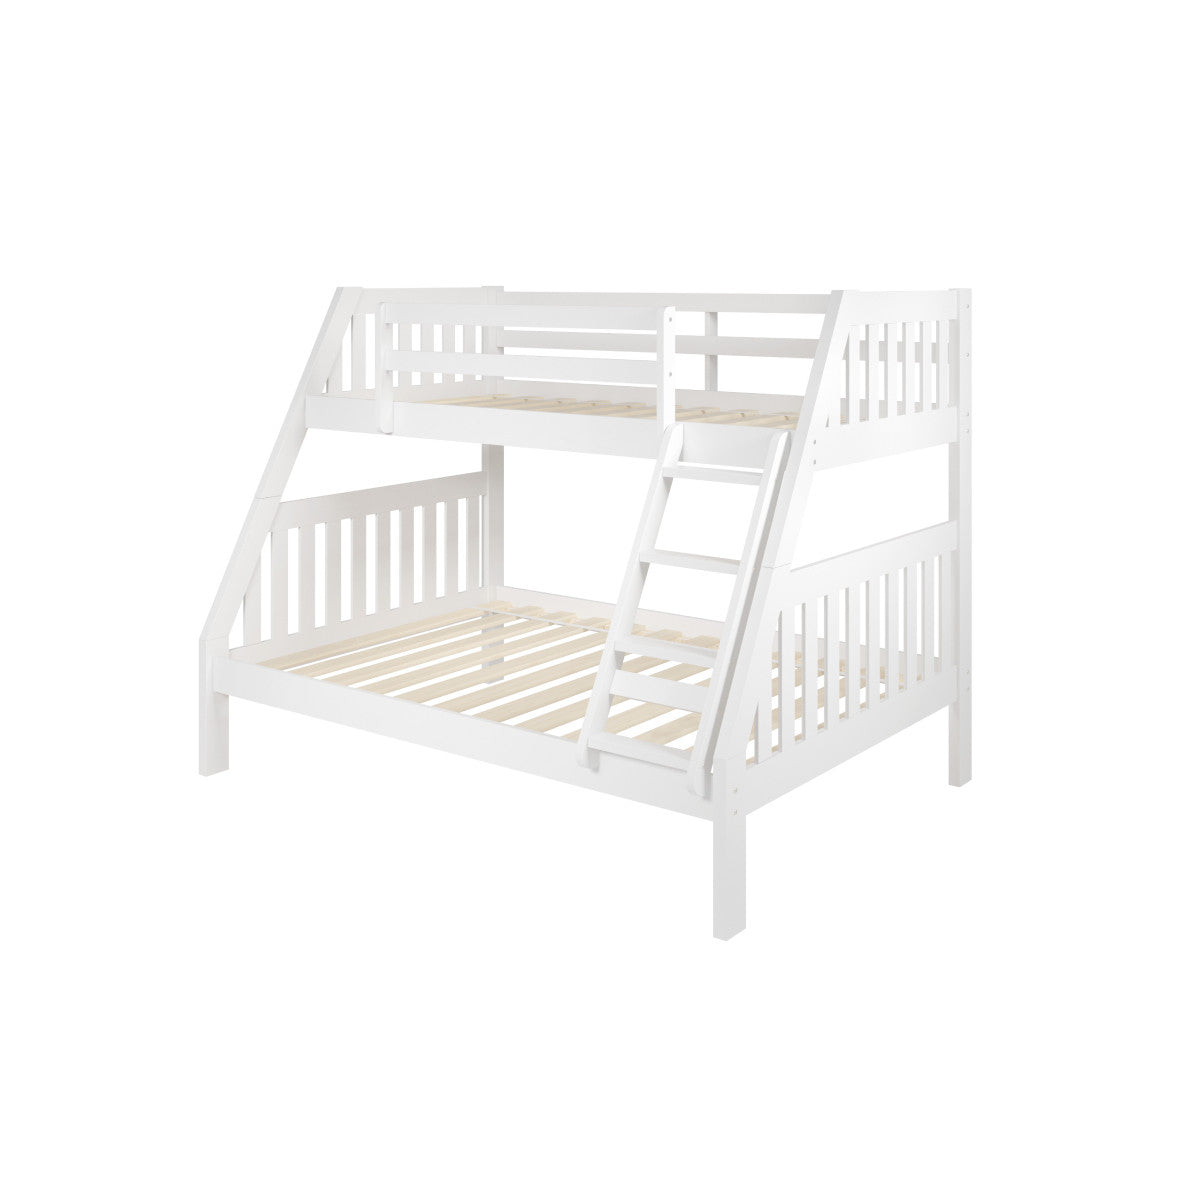 TWIN/FULL MISSION BUNK BED WHITE